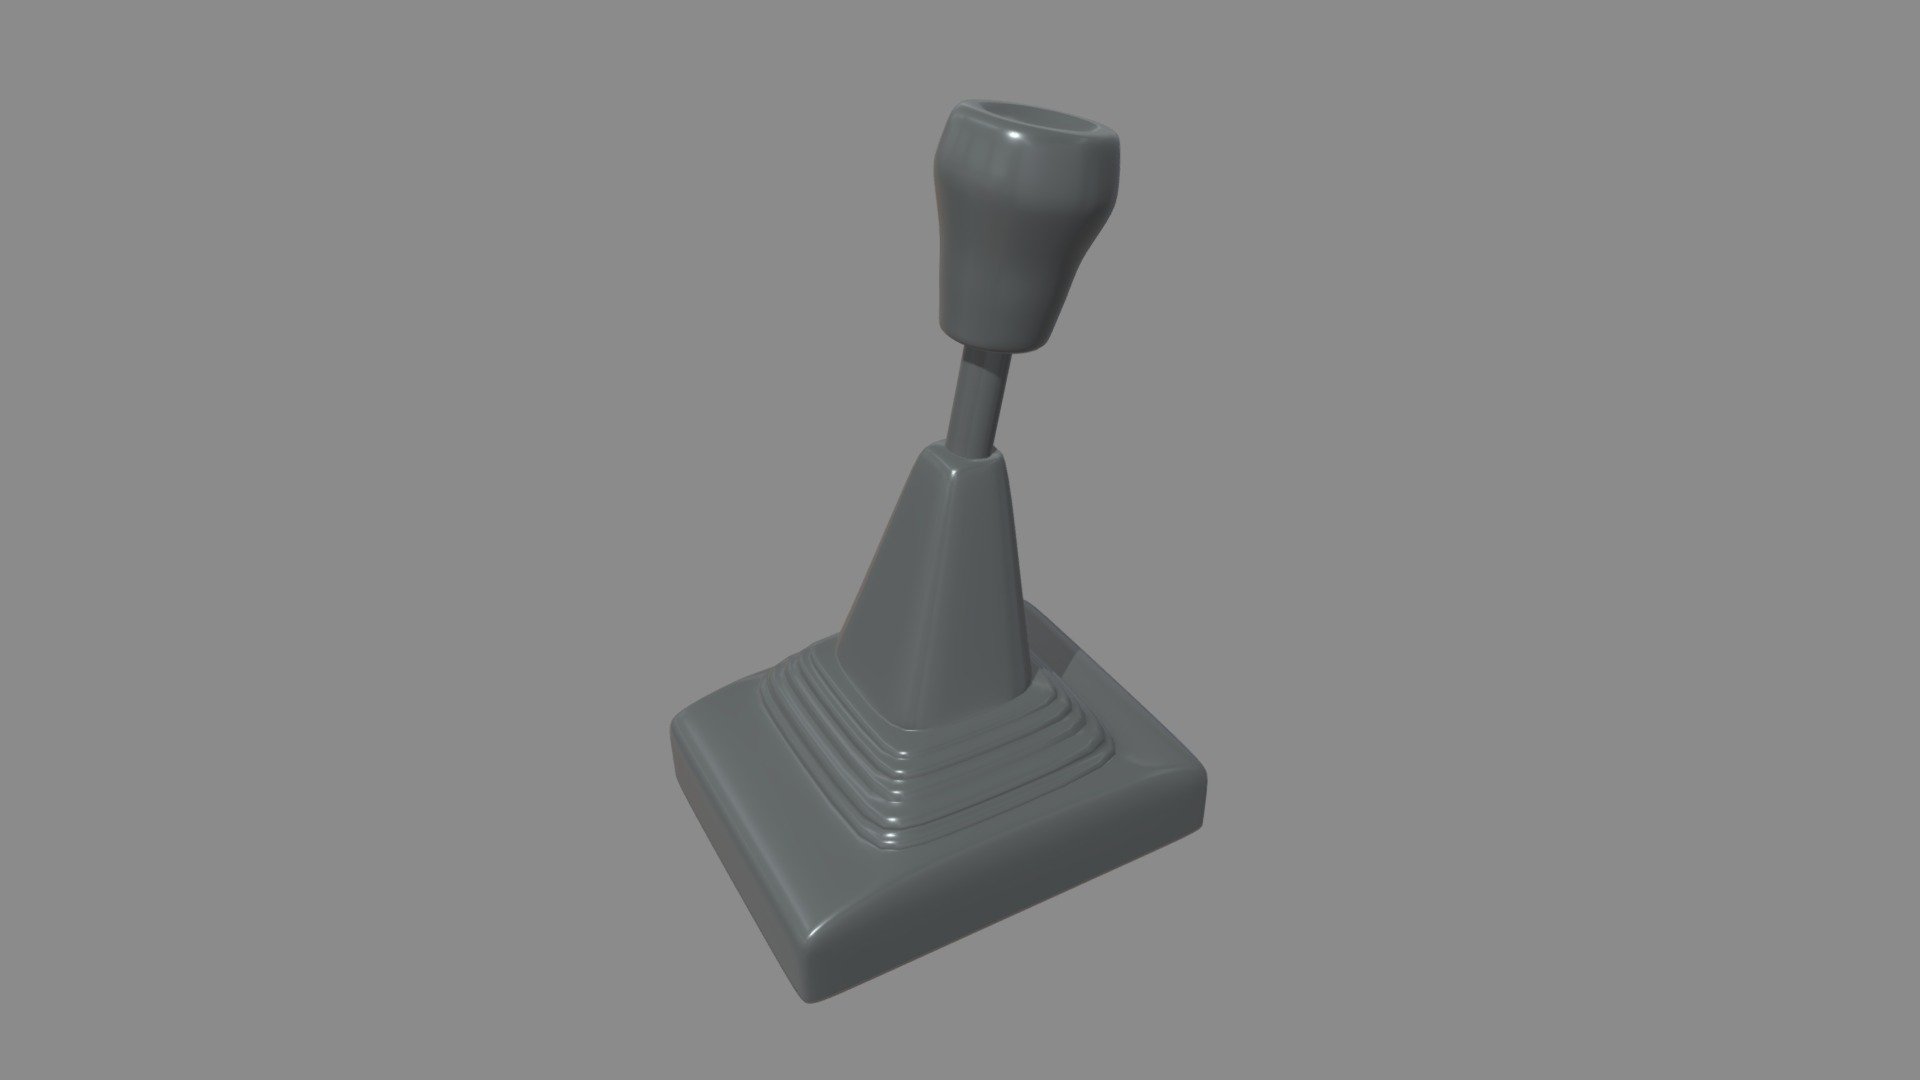 This model contains a Gear Lever 04 based on a real stylized car gear lever from a sport car which i modeled in Maya 2018. This model is perfect to create a new great scene with different car pieces or part of a car model. I got a lot of different Car Seats, Car Spoiler and Car Parts on my profile.

The model is ready as one unique part and ready for being a great CGI model and also a 3D printable model, i will add the STL model, tested for 3D printing in Ultimaker Cura. I uploaded the model in .mb ,blend, .stl, .obj and .fbx. If you need any other file tell me.

If you need any kind of help contact me, i will help you with everything i can. If you like the model please give me some feedback, I would appreciate it.

Don’t doubt on contacting me, i would be very happy to help. If you experience any kind of difficulties, be sure to contact me and i will help you. Sincerely Yours, ViperJr3D - Gear Lever 04 - Buy Royalty Free 3D model by ViperJr3D 3d model